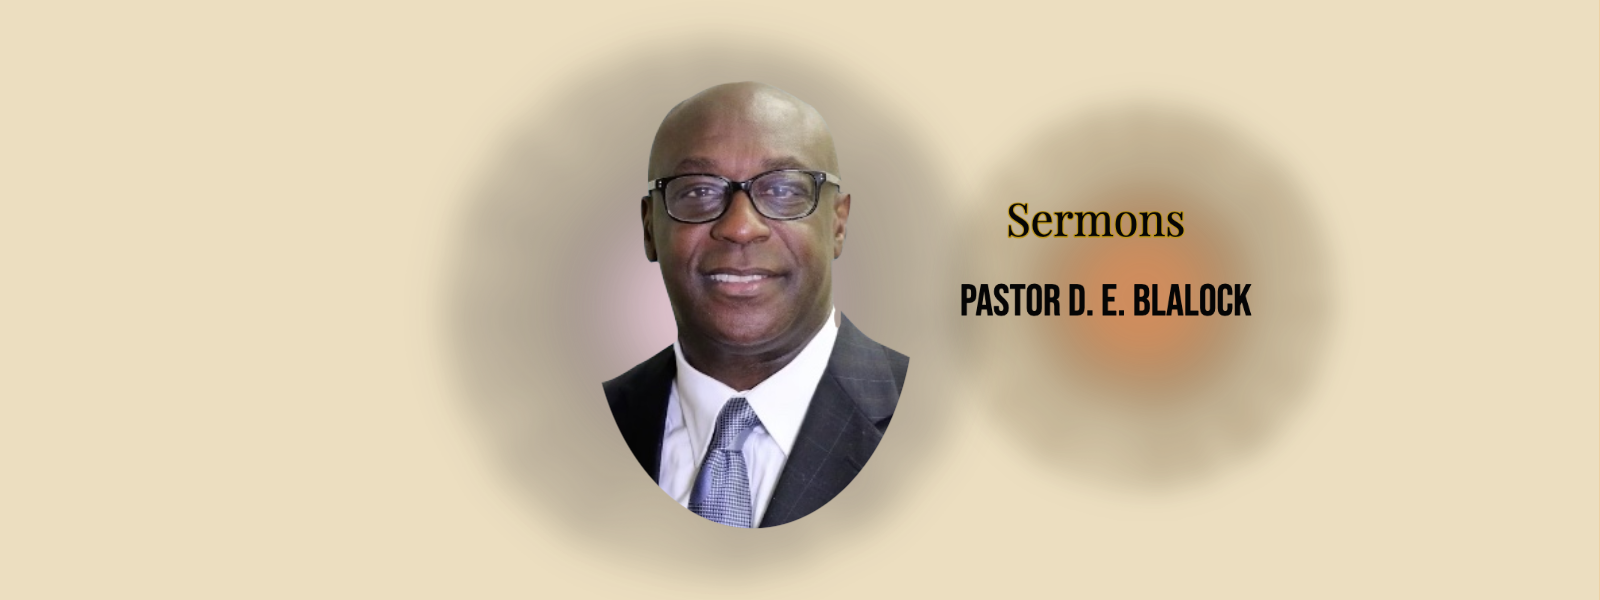 “Focus On the Cross”-Pastor D. E. Blalock (previously recorded)